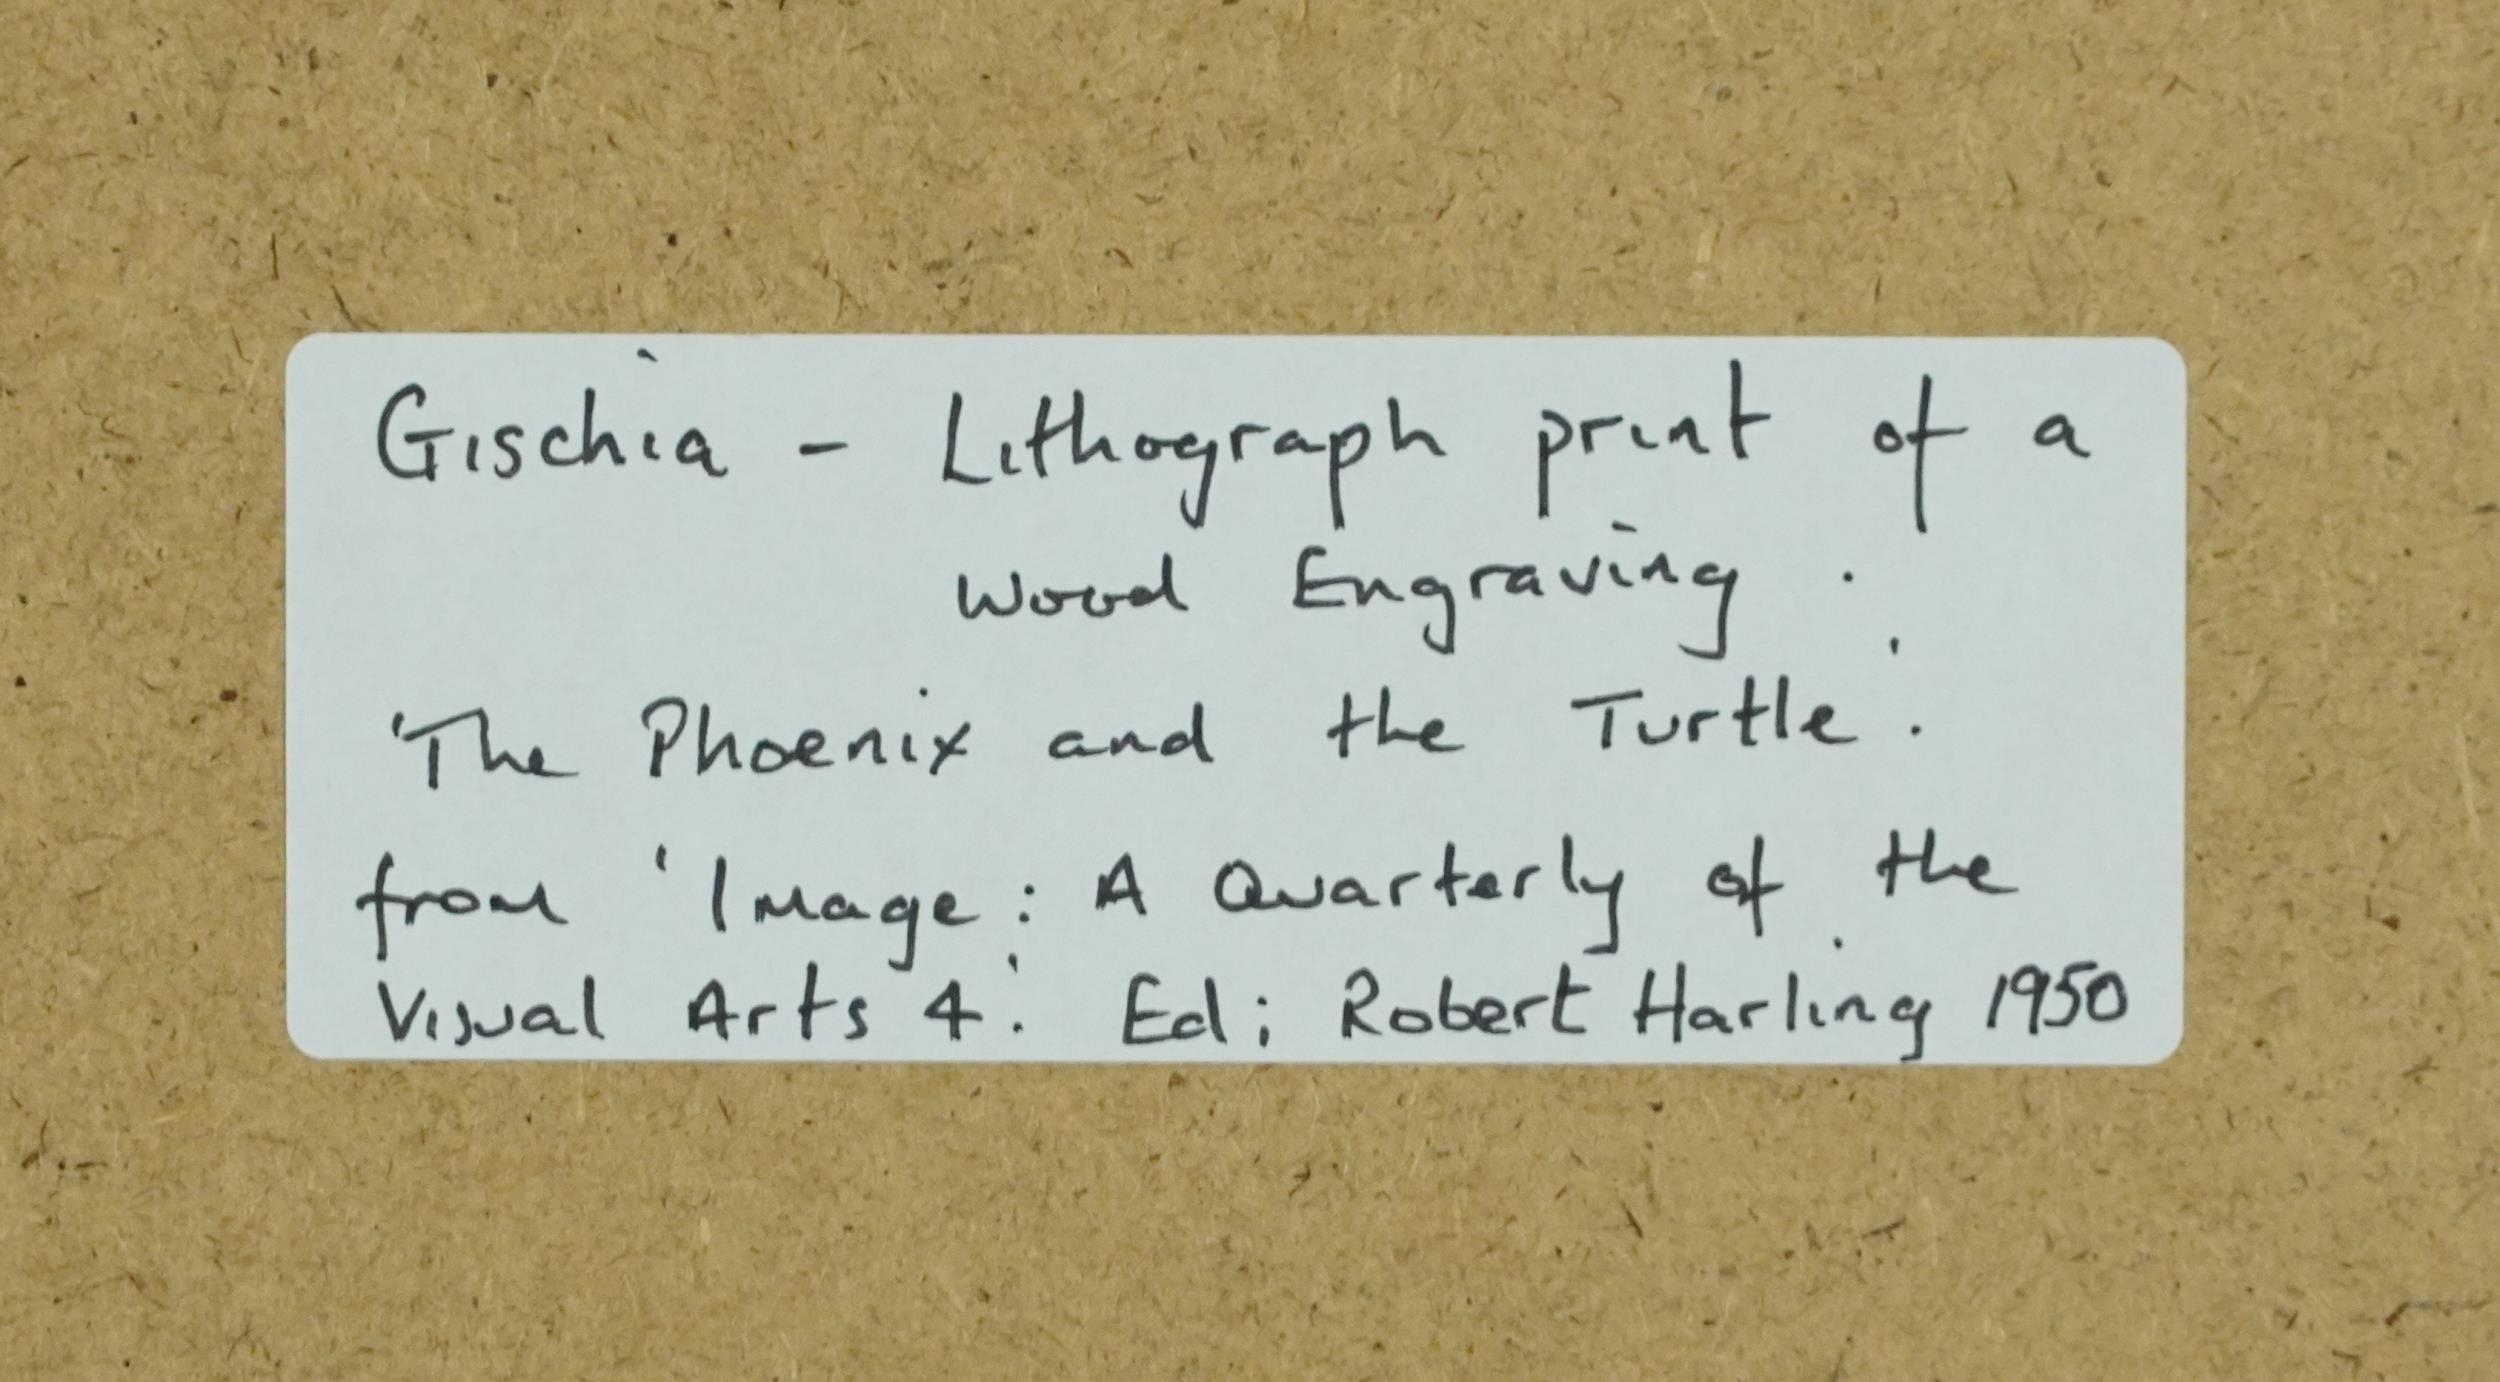 Gischia - The Phoenix and the Turtle, lithographic print of a wood engraving inscribed Image: A - Image 4 of 4